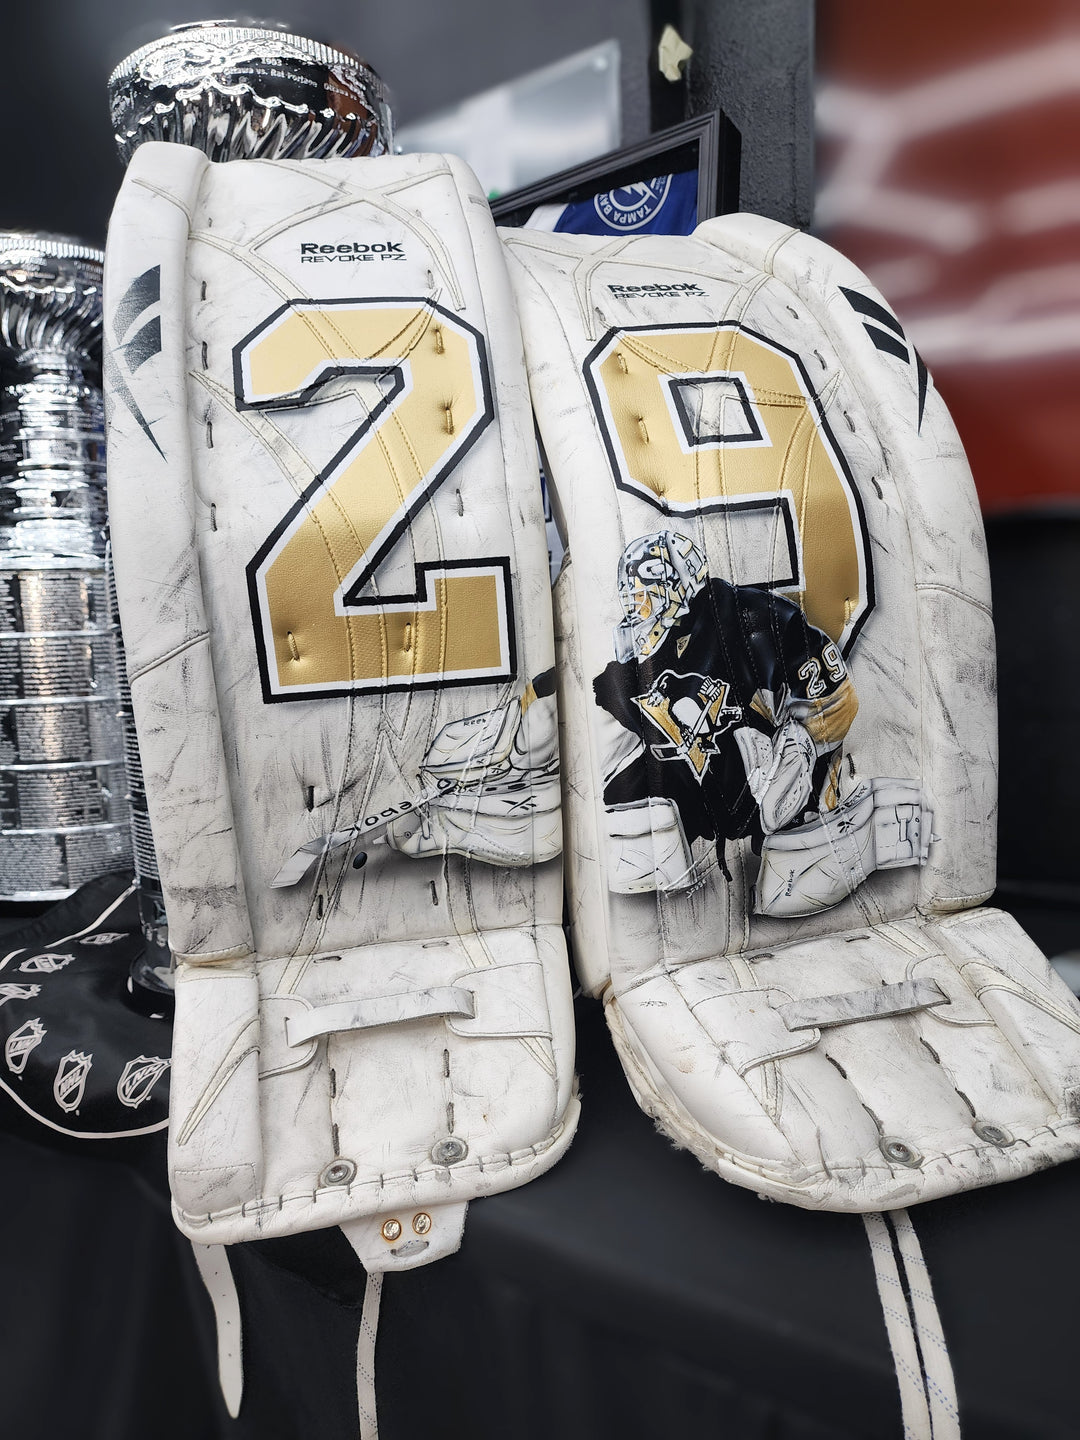 Breaking News: MARC-ANDRE FLEURY Game Worn Goalie Pads in the House!